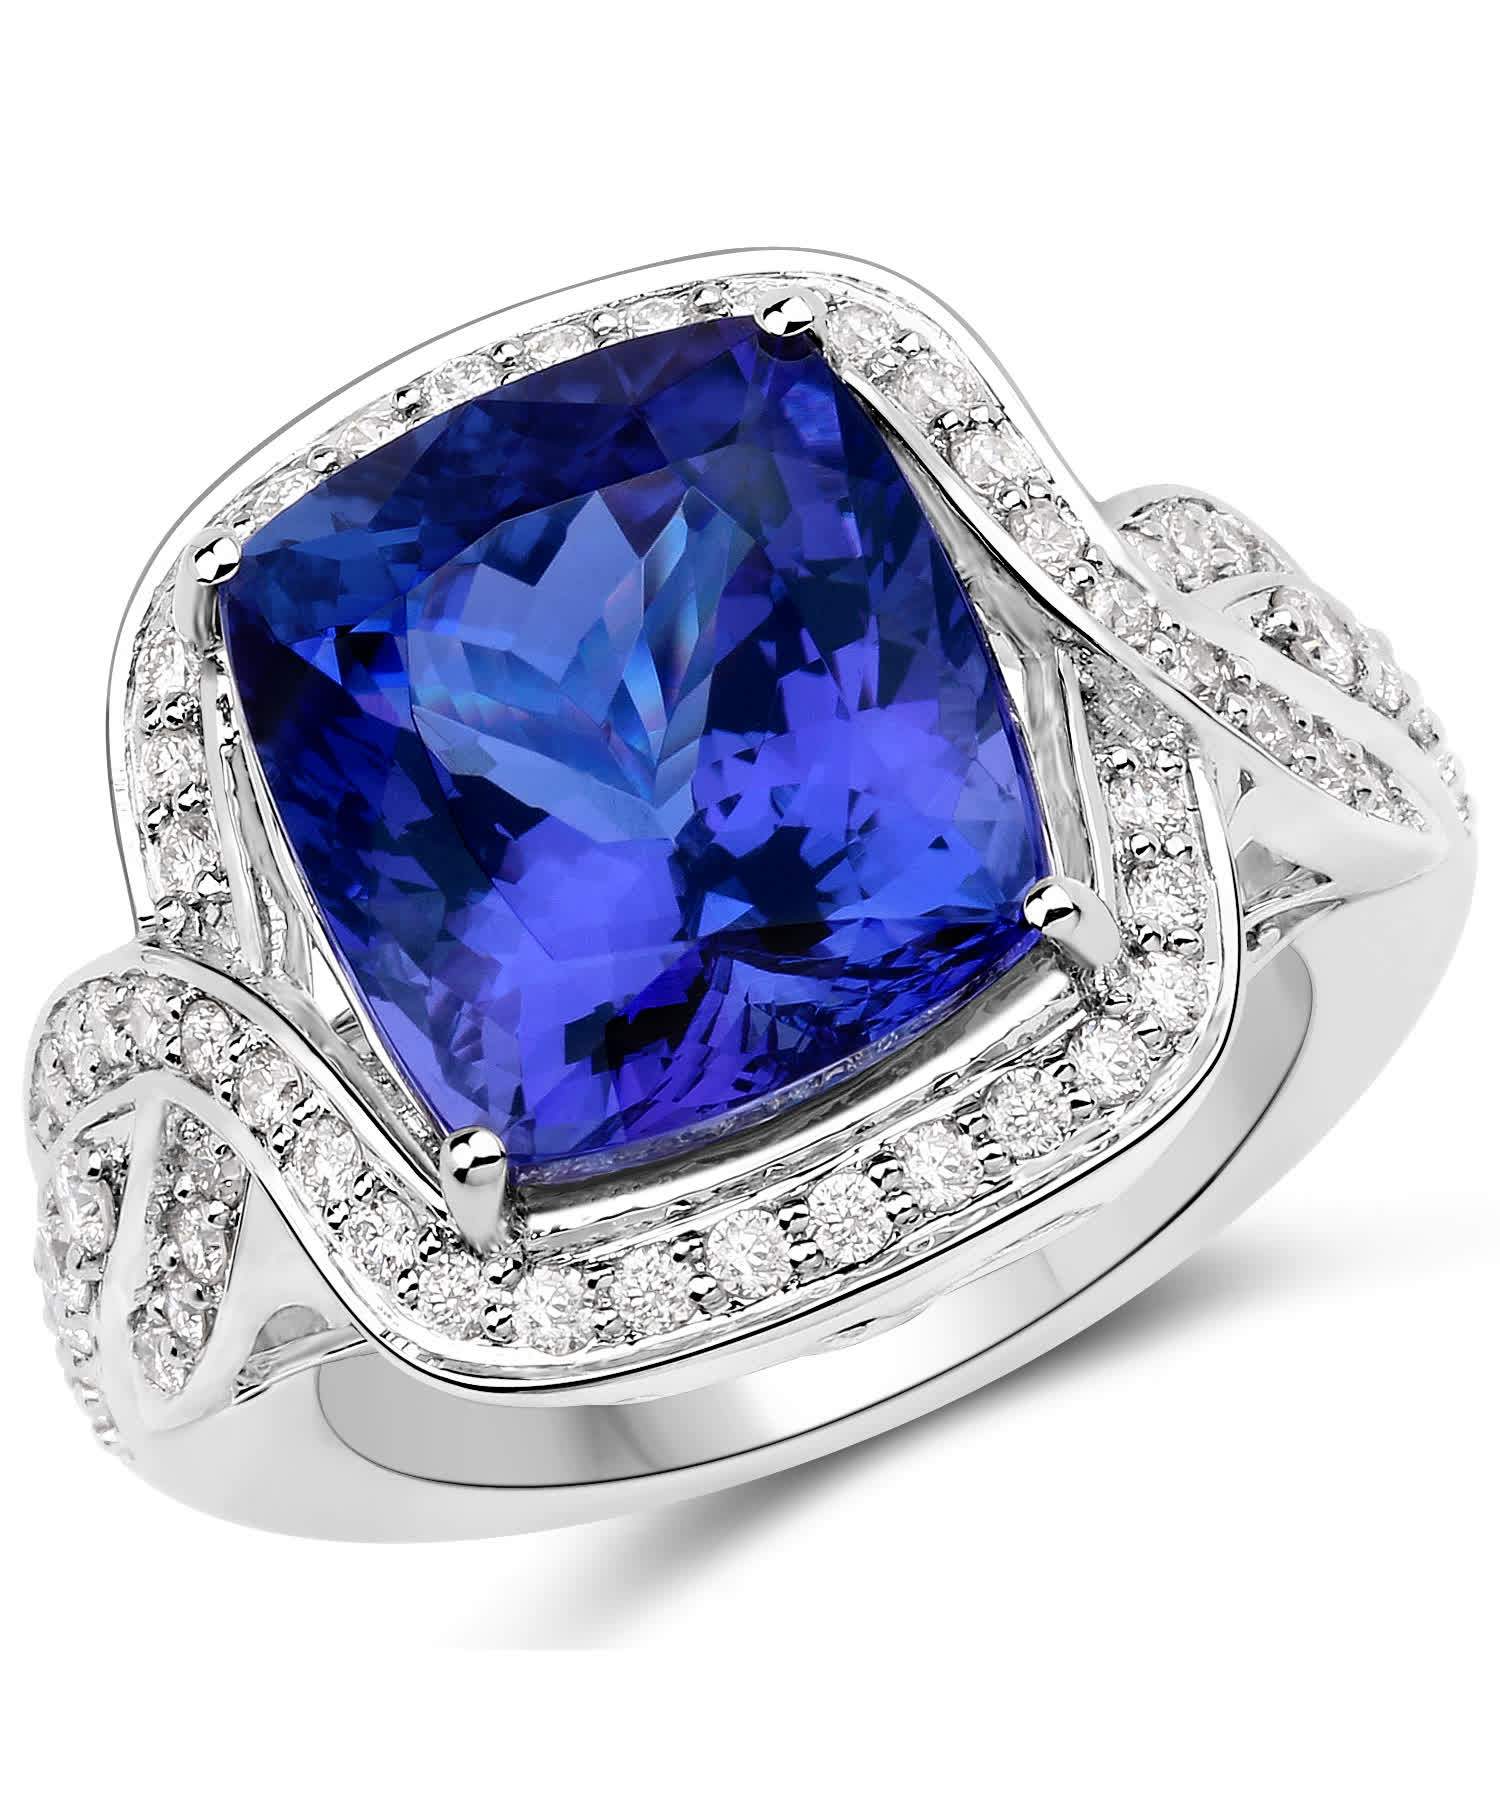 13.74ctw Natural Superior Tanzanite and Diamond 18k Gold Cocktail Ring View 1